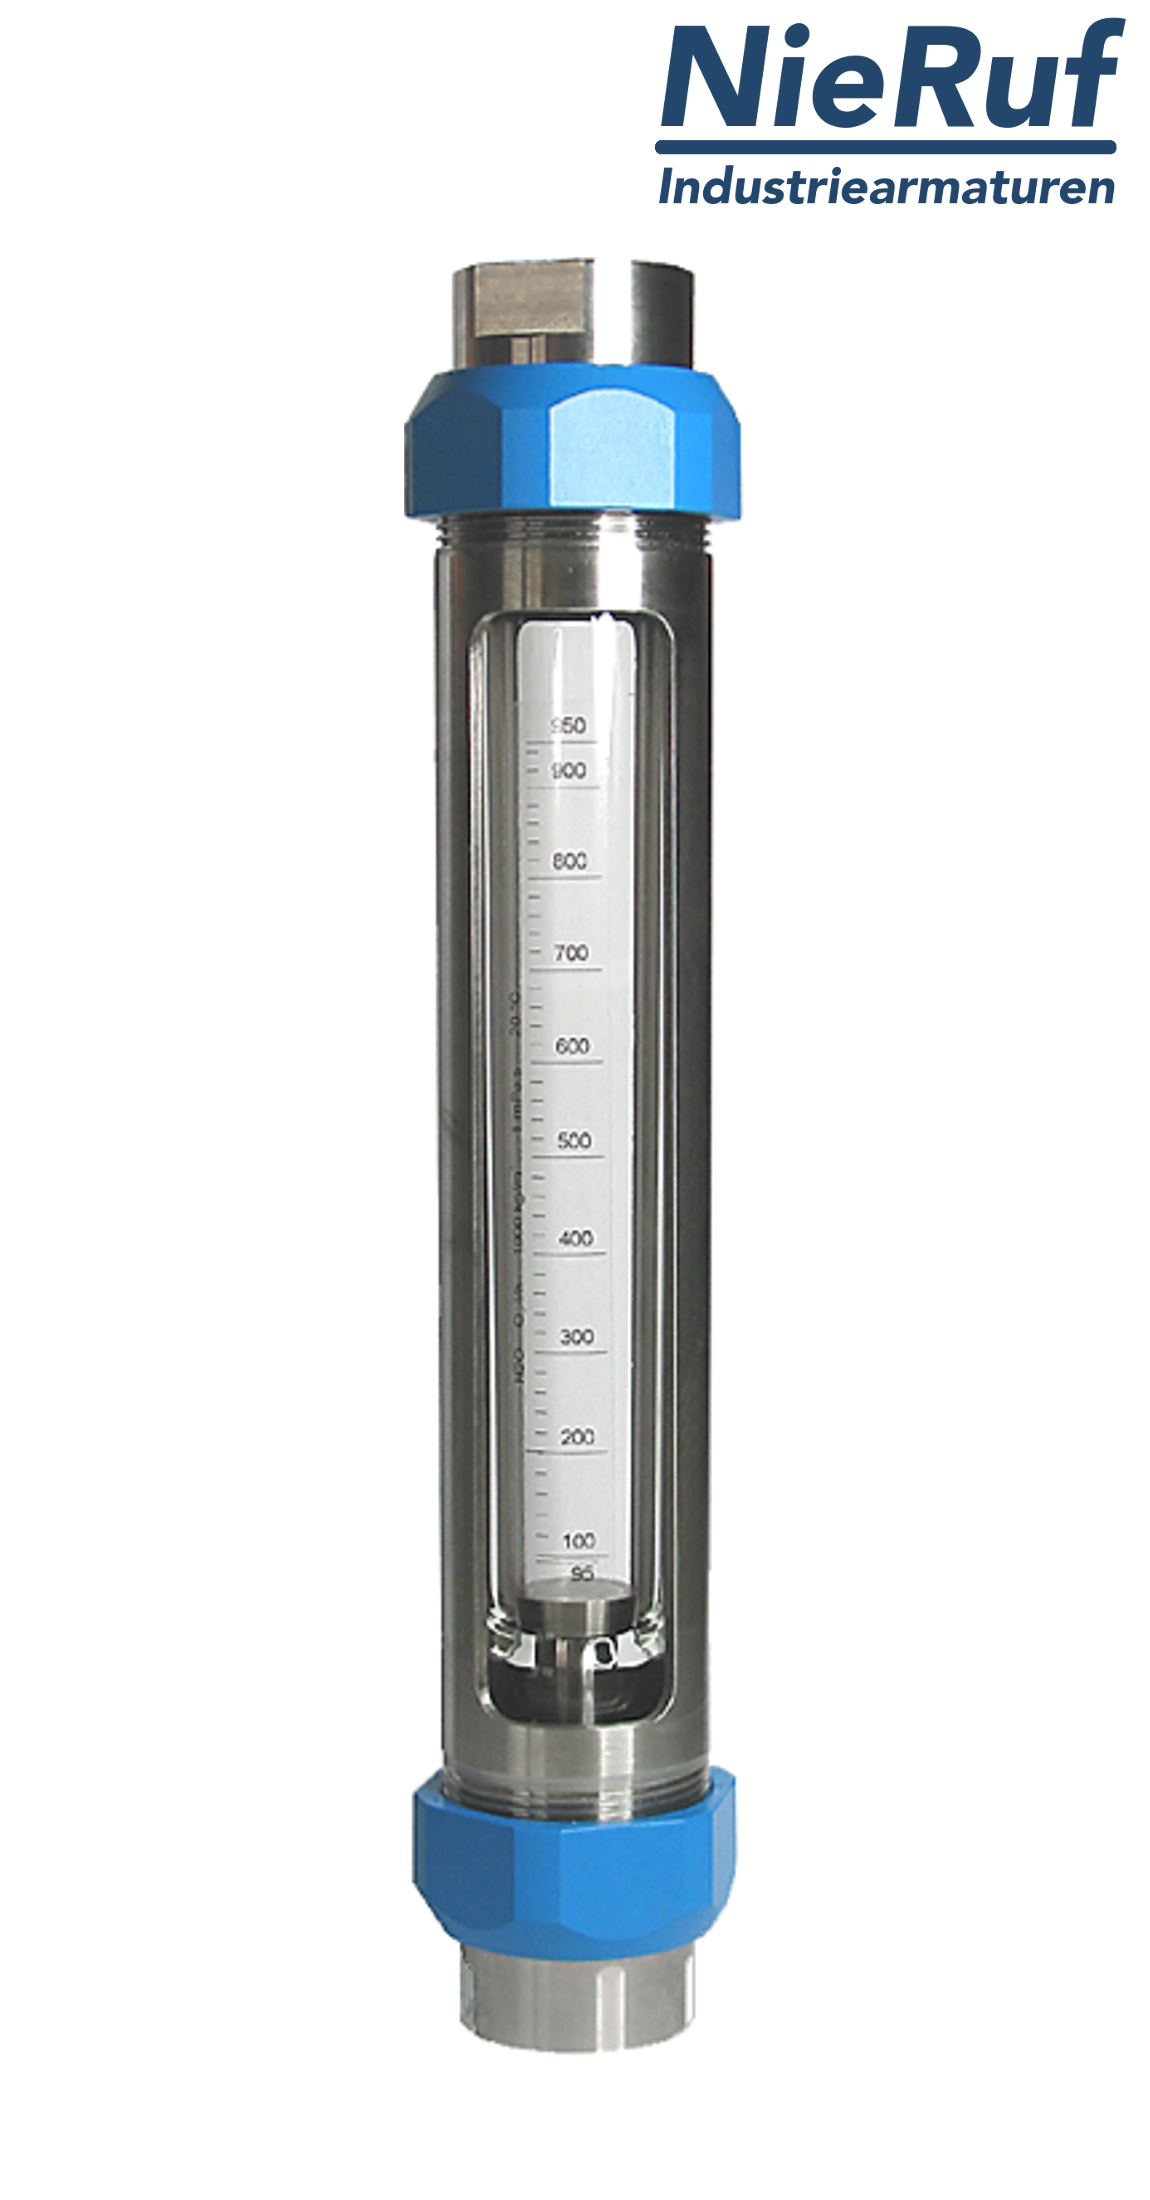 Variable area flowmeter stainless steel + borosilicate 1/4" inch 40.0 - 400.0 l/h water FKM